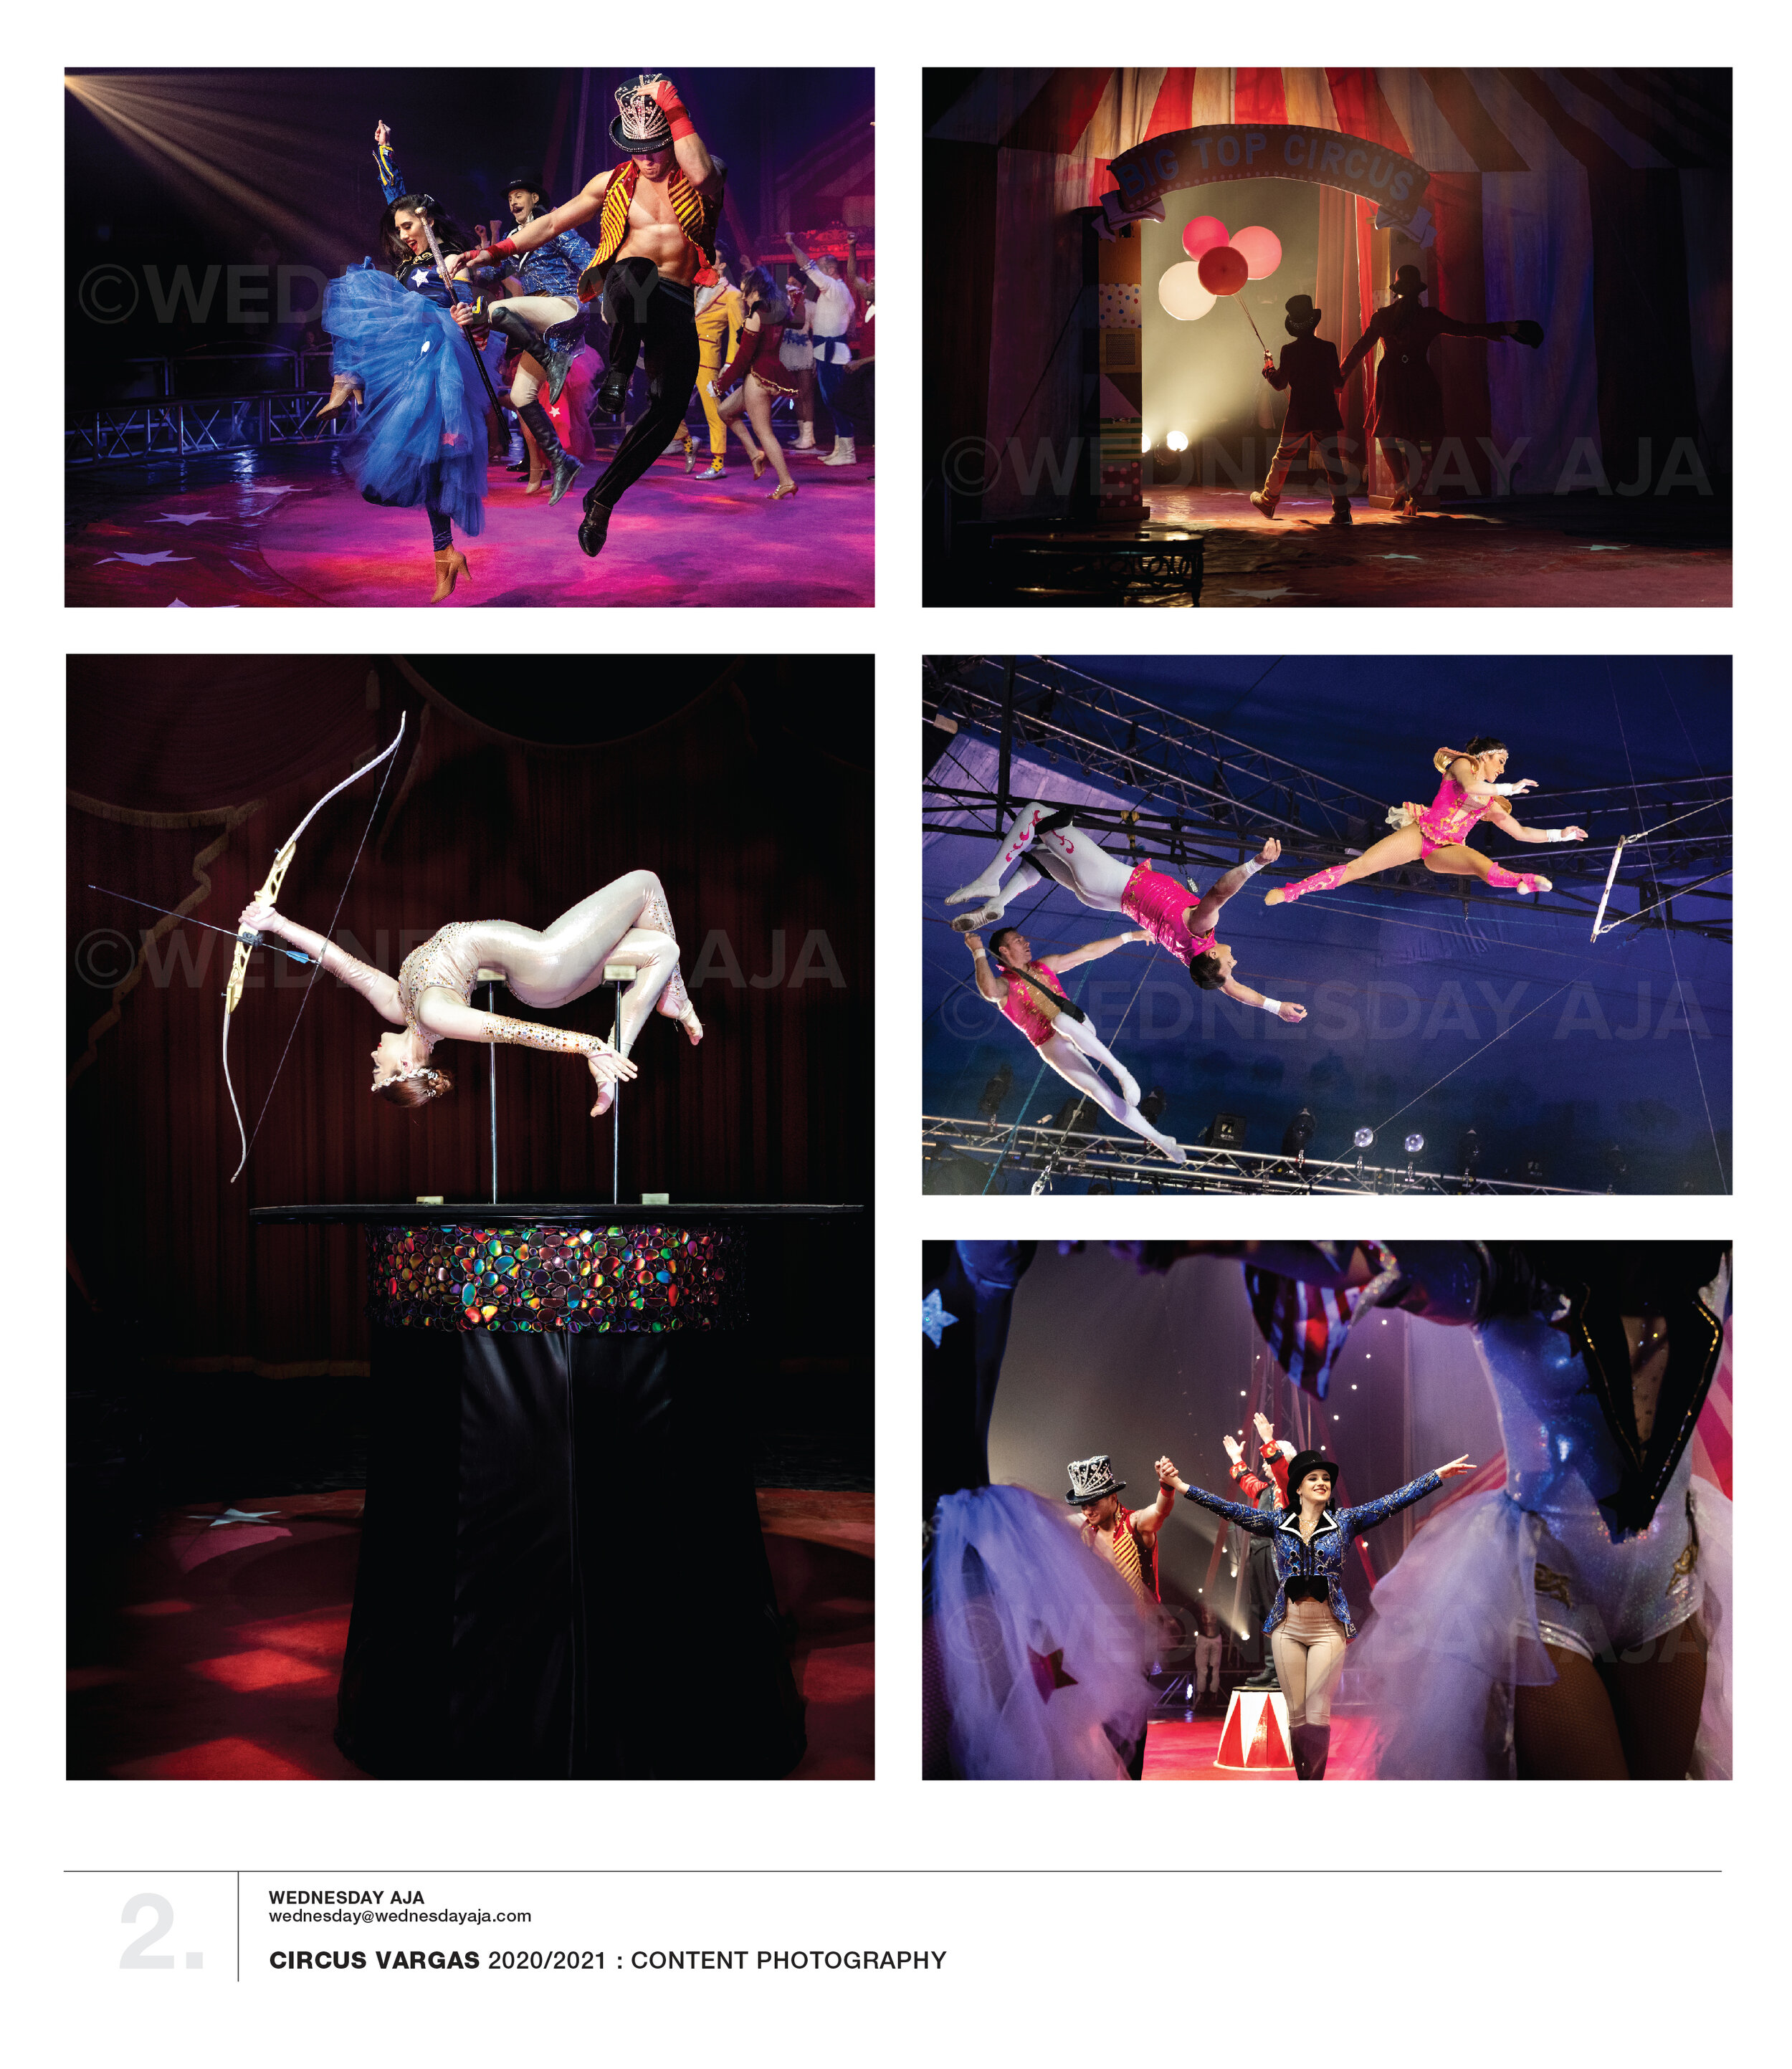   CIRCUS VARGAS  Event Photography / Promotional Content  